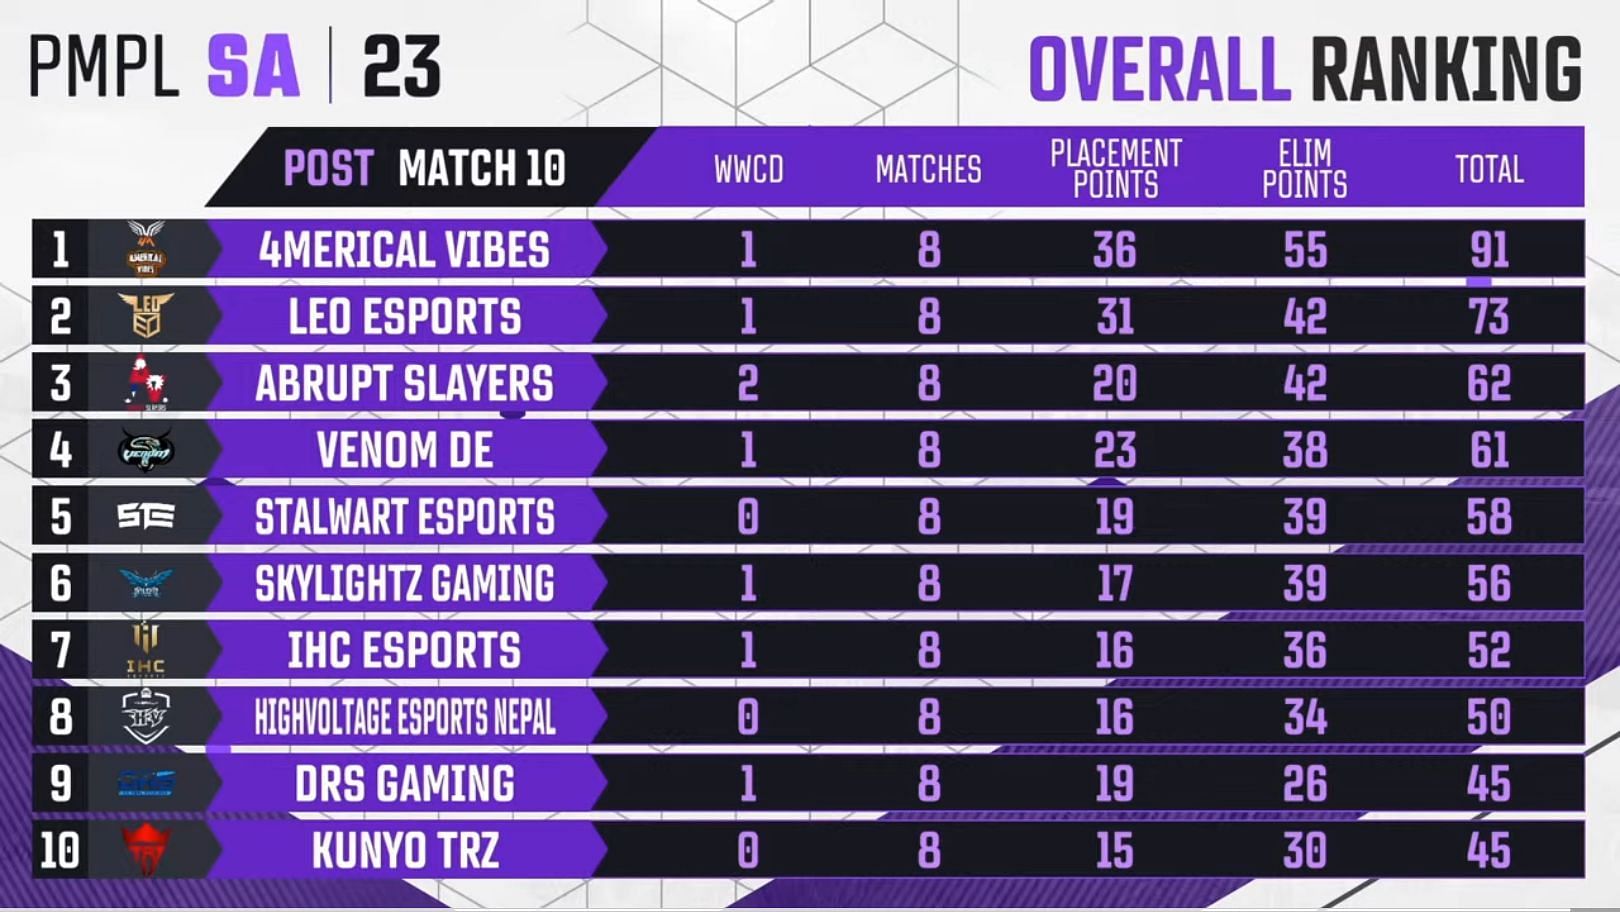 Stalwart held fifth place with 58 points after PMPL Day 2 (Image via PUBG Mobile)